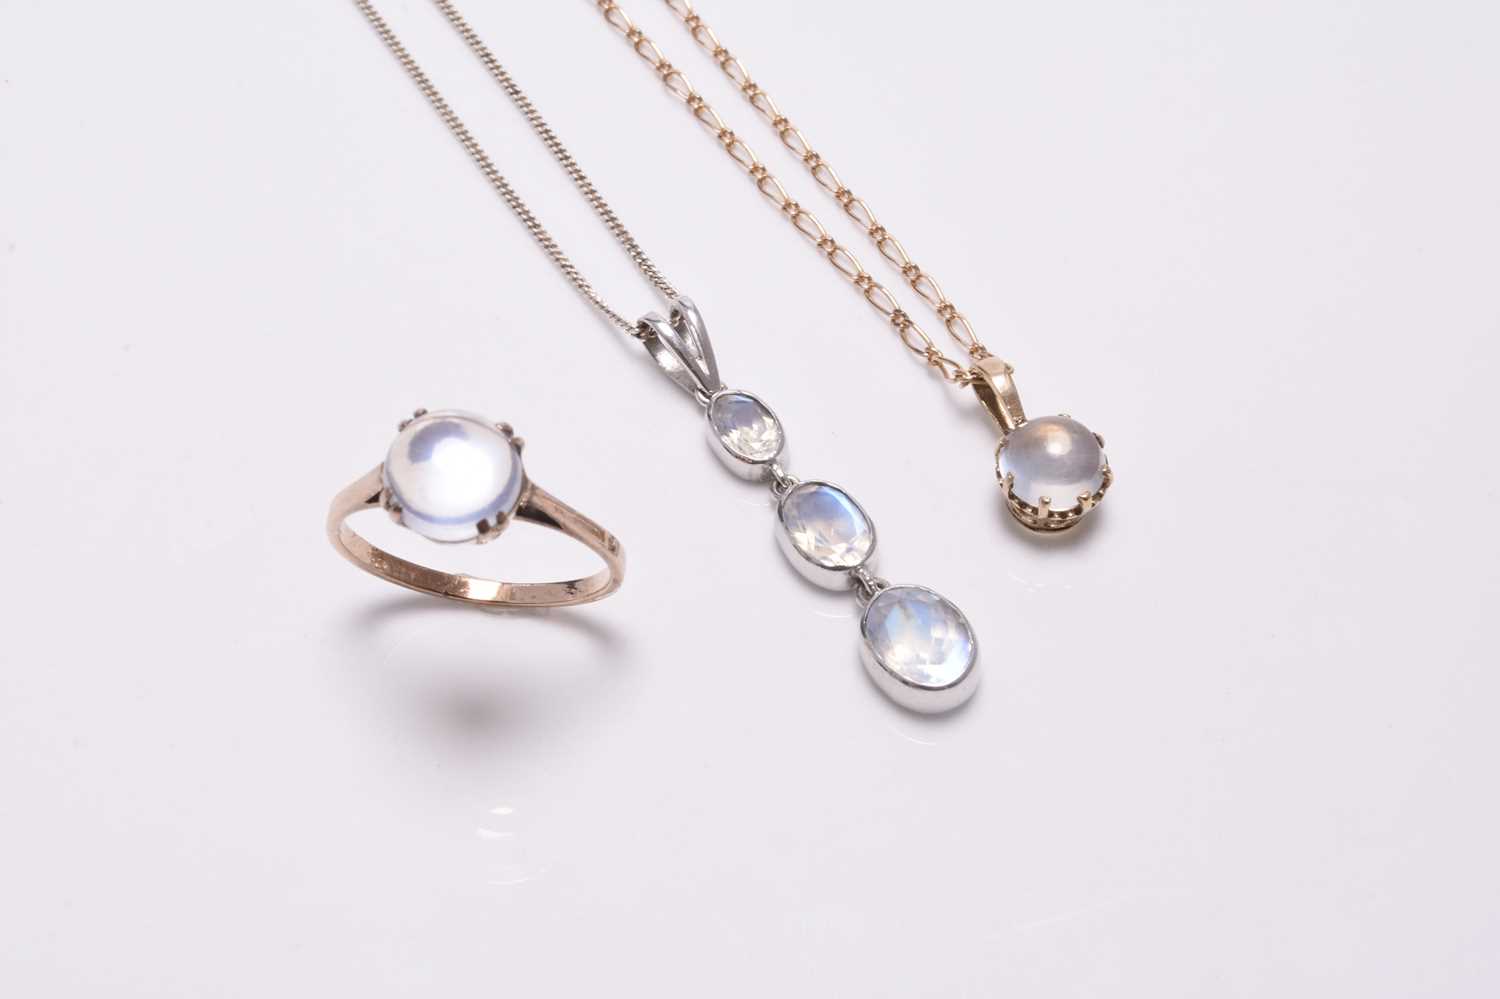 A collection of moonstone jewellery